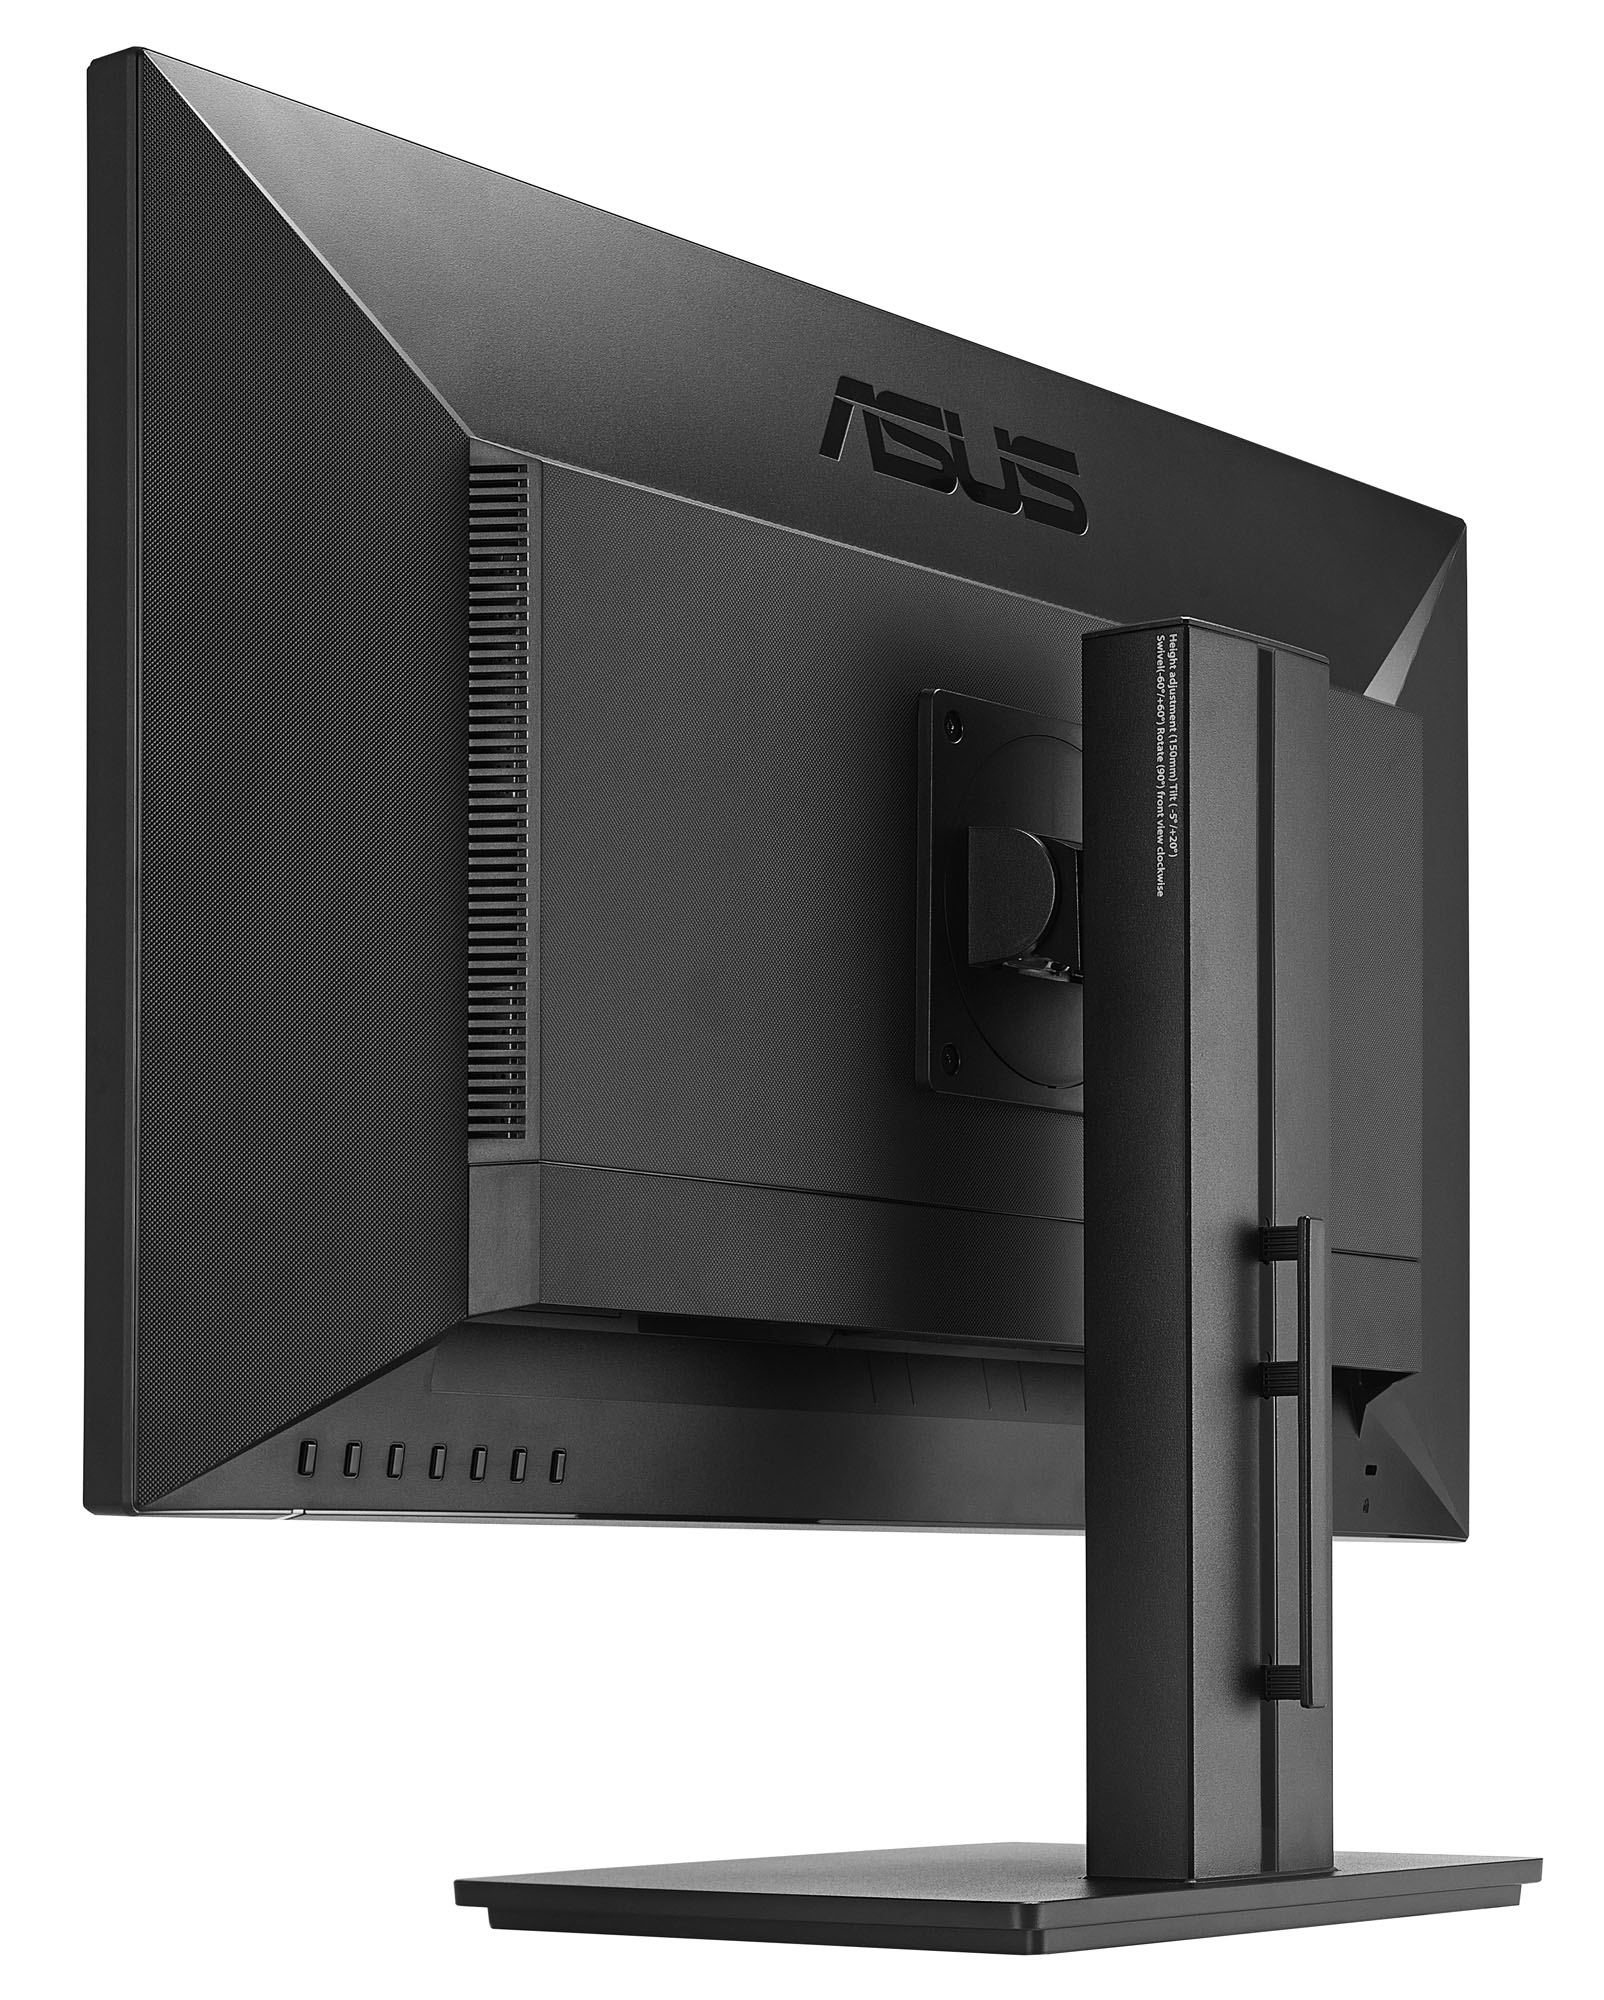 Media asset in full size related to 3dfxzone.it news item entitled as follows: ASUS annuncia il monitor 4K PB287Q per il gaming in Ultra HD | Image Name: news21123_ASUS-PB287Q-4K-Monitor_2.jpg